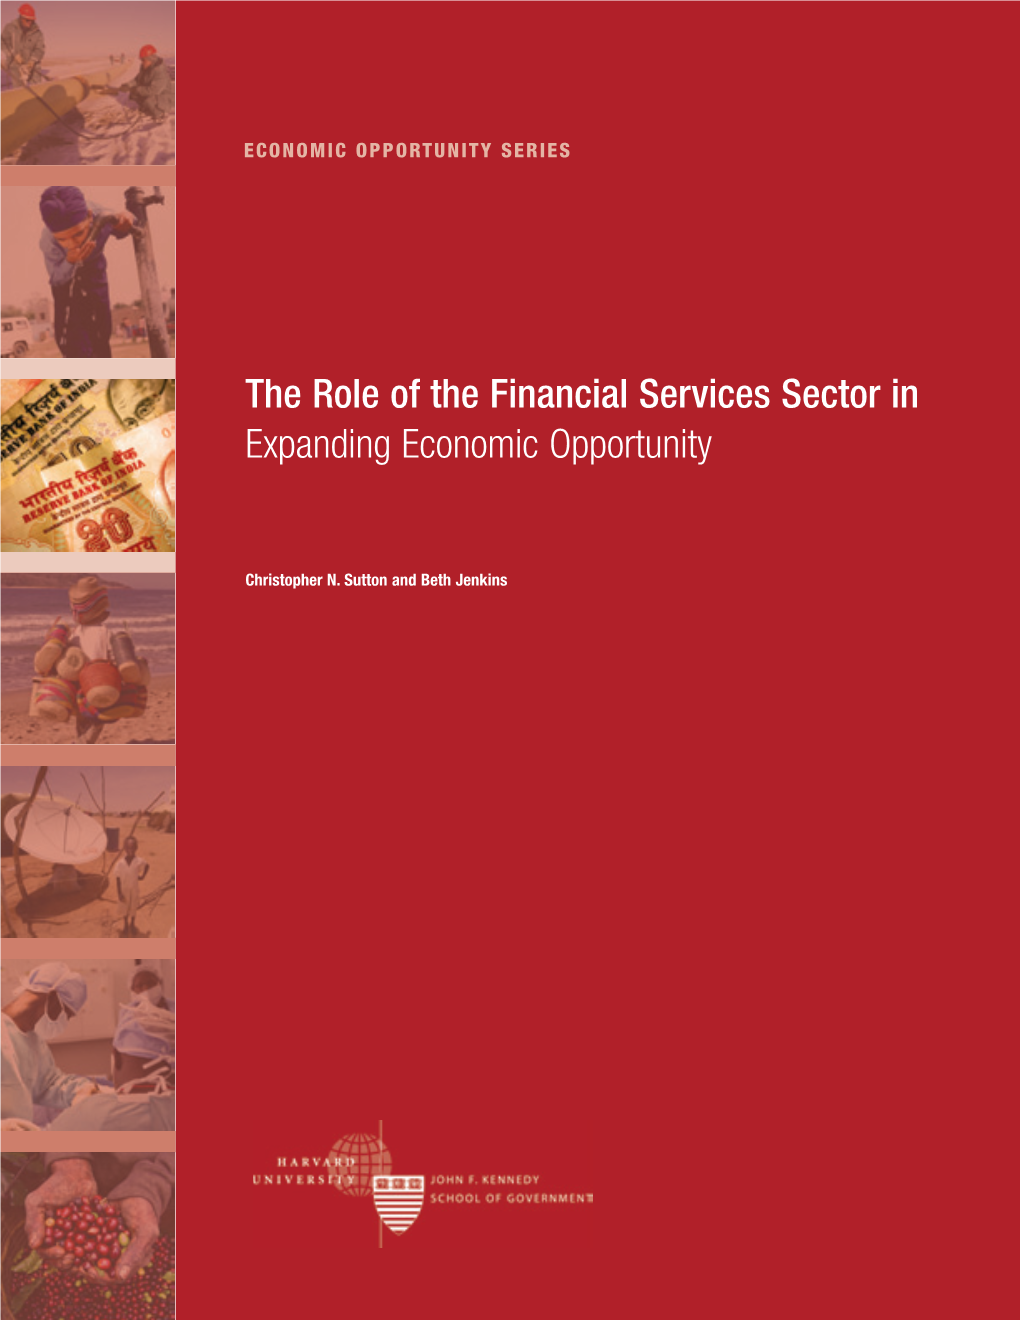 The Role of the Financial Services Sector in Expanding Economic Opportunity